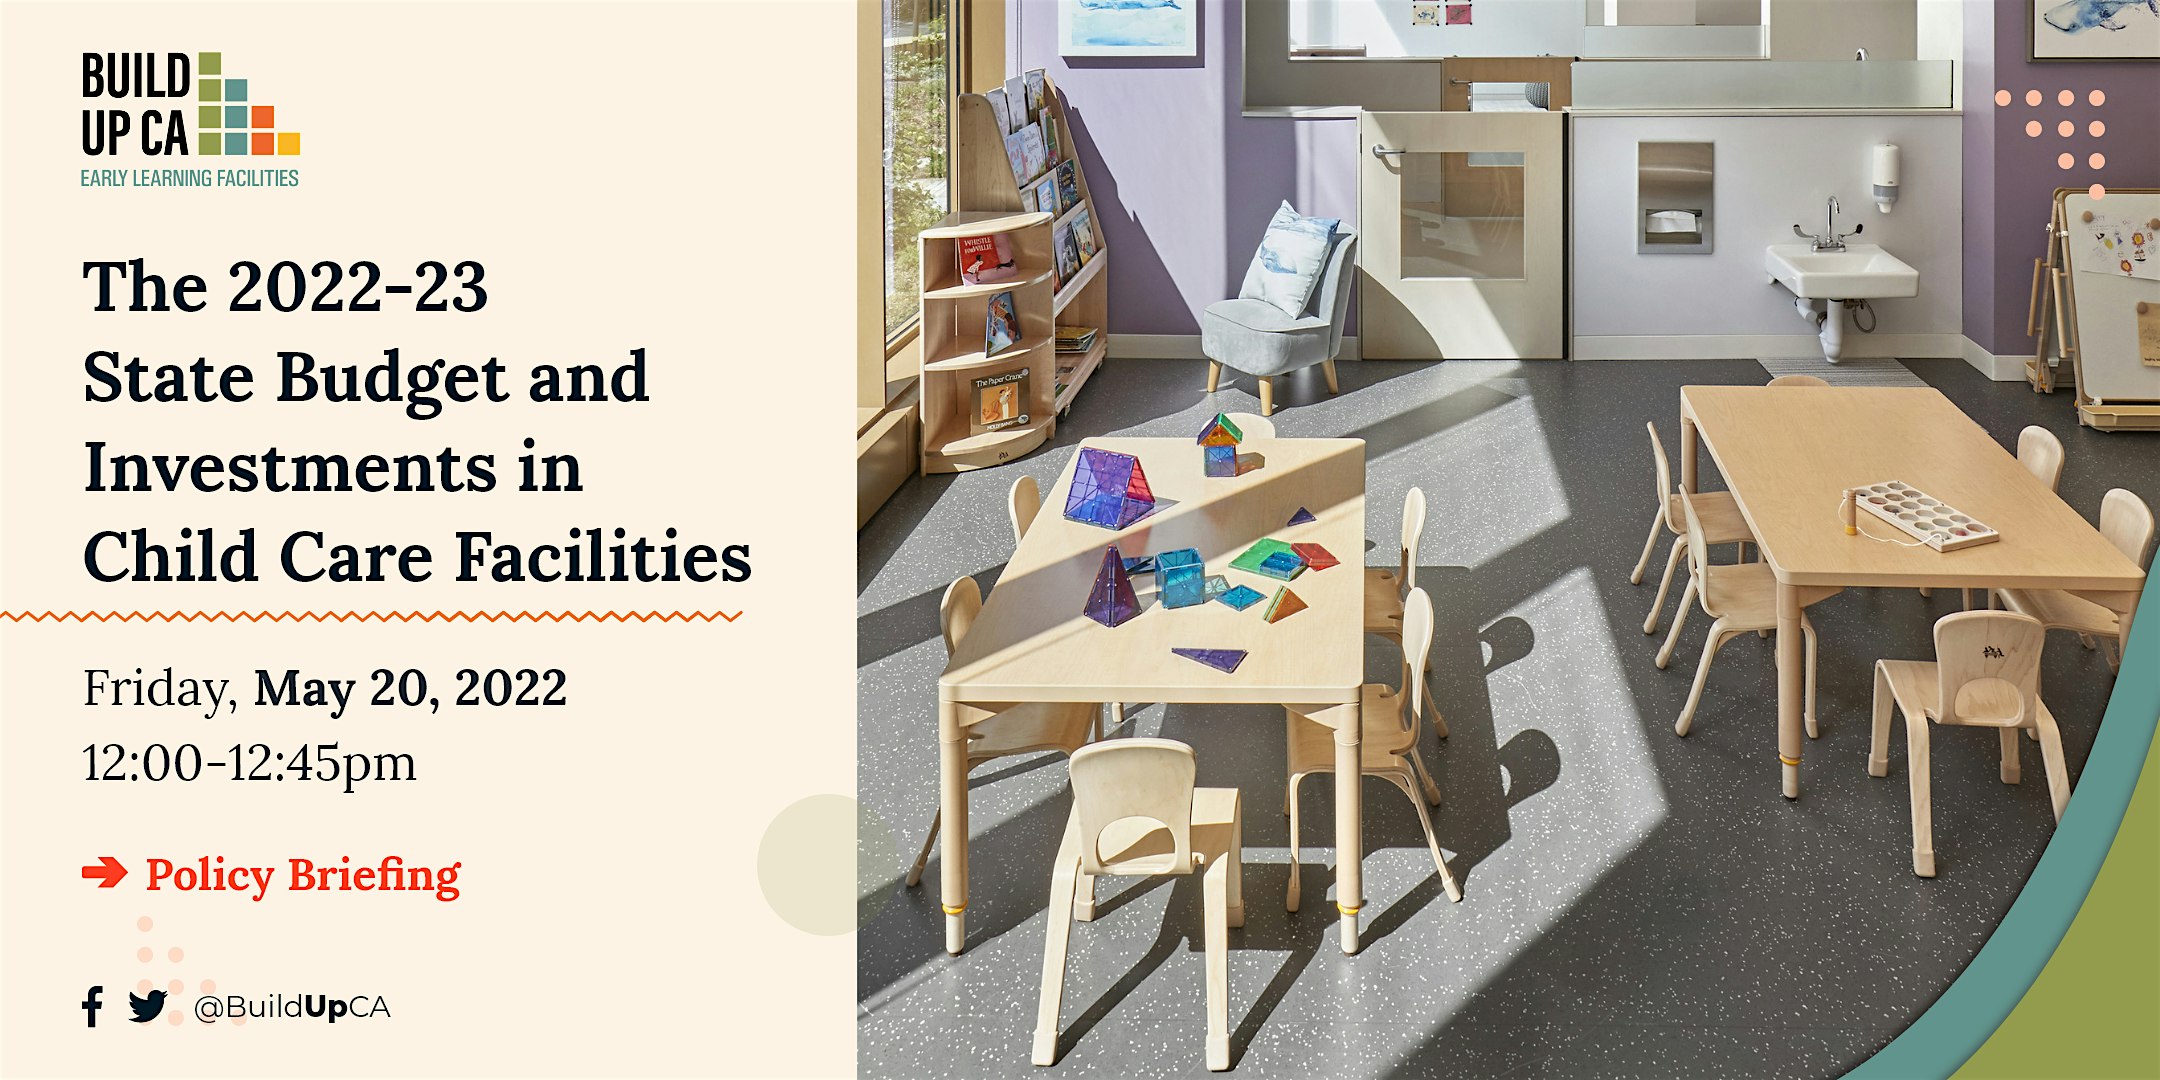 The 2022-23 State Budget and Investments in Child Care Facilities